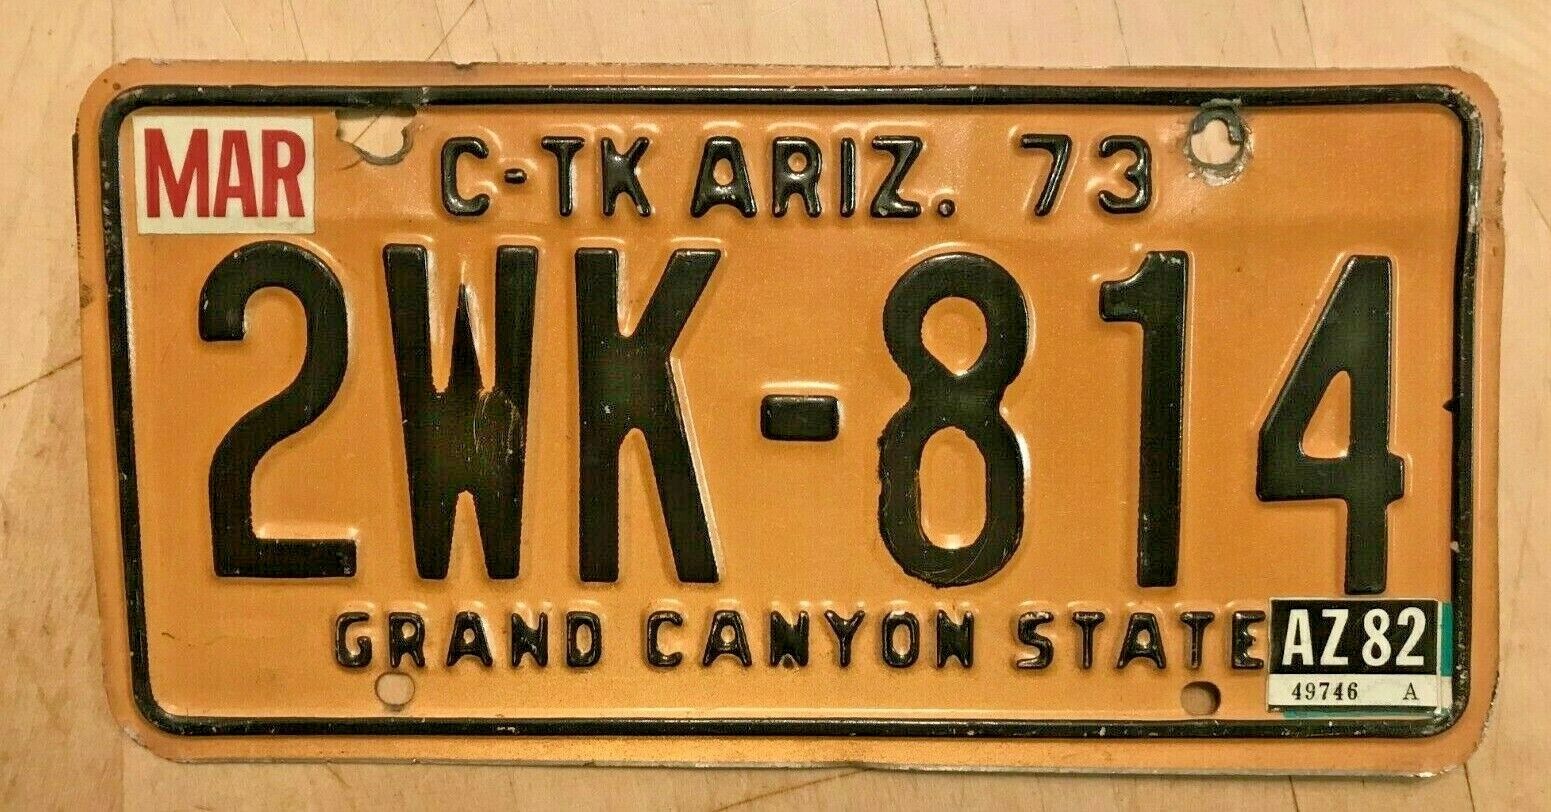 1973 ARIZONA COMMERCIAL TRUCK LICENSE PLATE \